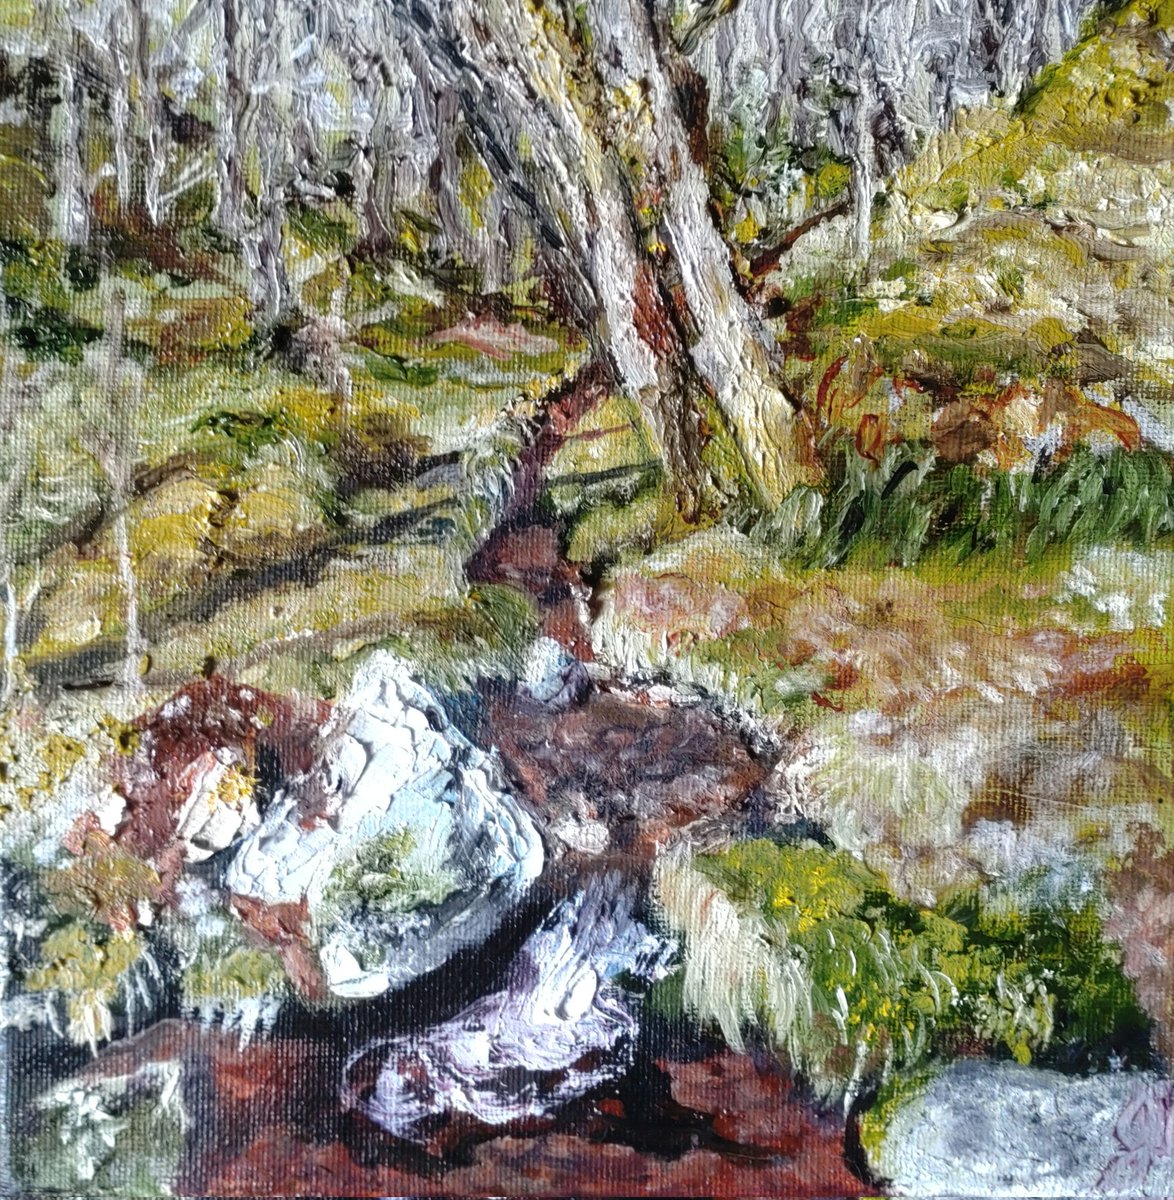 Another little one to fill in the gaps! 'Wee Burn, Ariundle'. I may not always be able to walk in the woods but painting them is my therapy!

#art #supportingartists #painting #oilpainting #artistslife #scottishlife #scotland #ariundle #WOMENSART #WOMENSART1